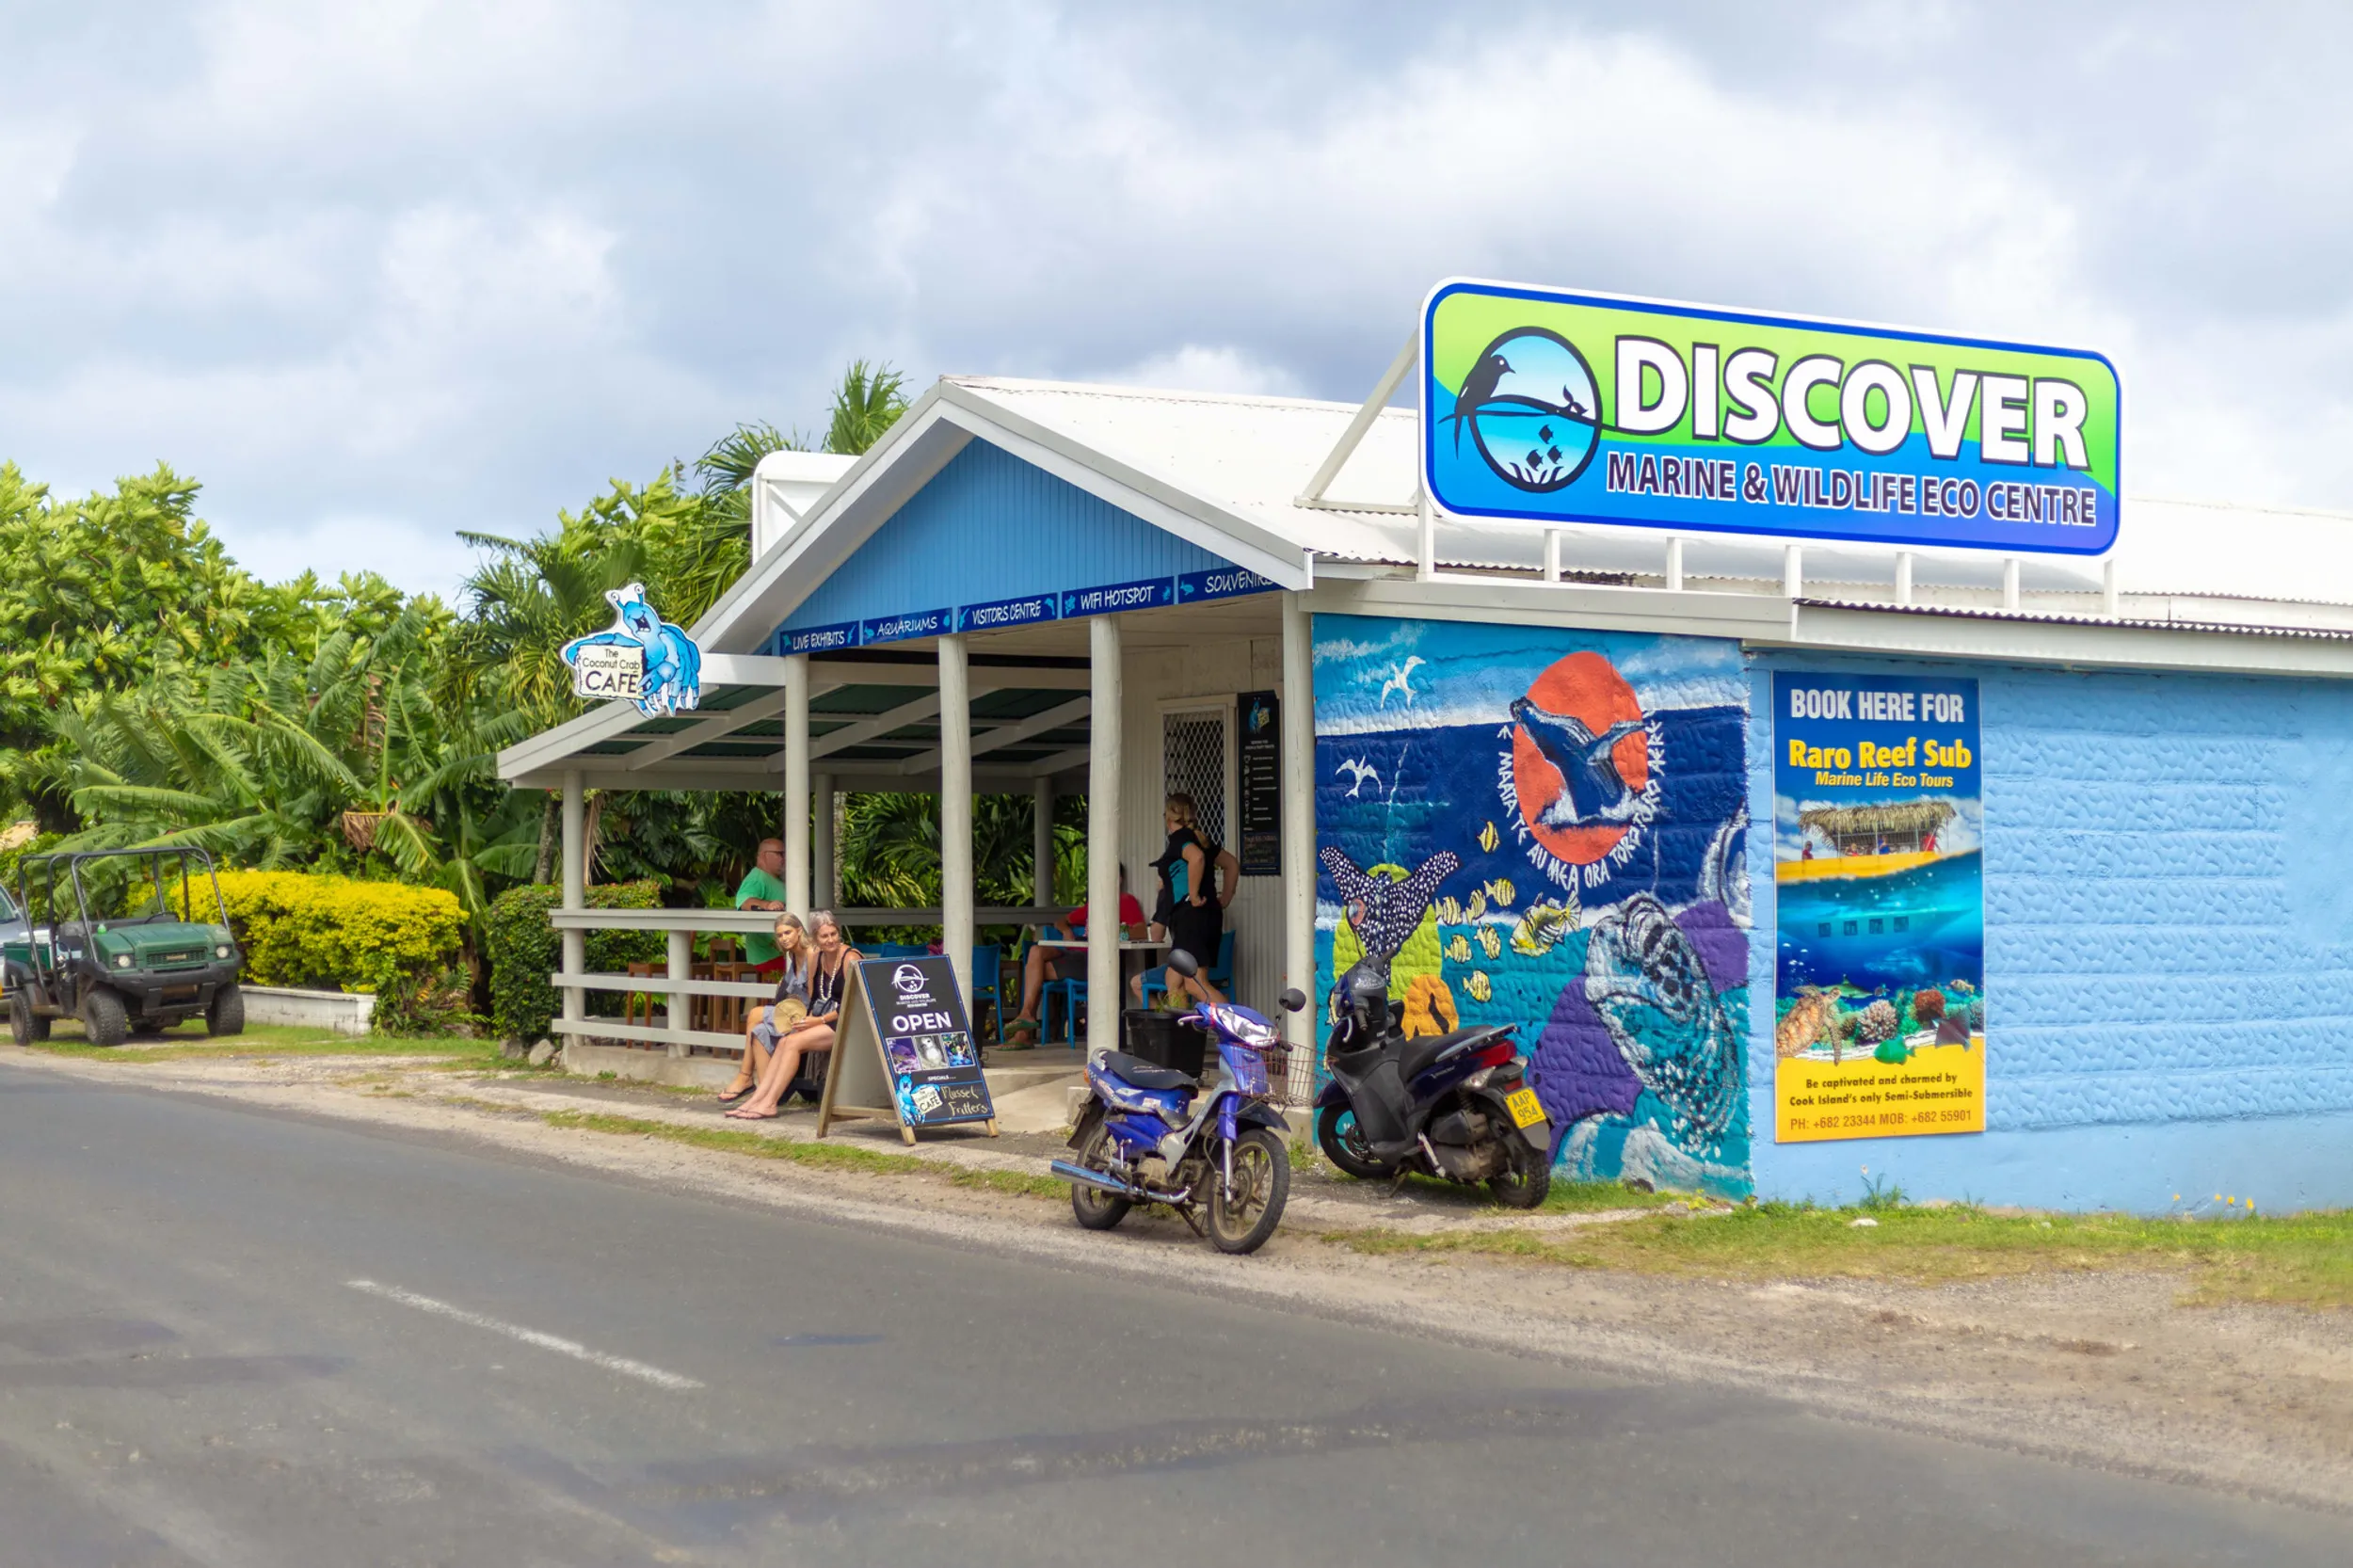 Discover Marine Wildlife & Eco Centre in Cook Islands, Australia and Oceania | Museums - Rated 0.8